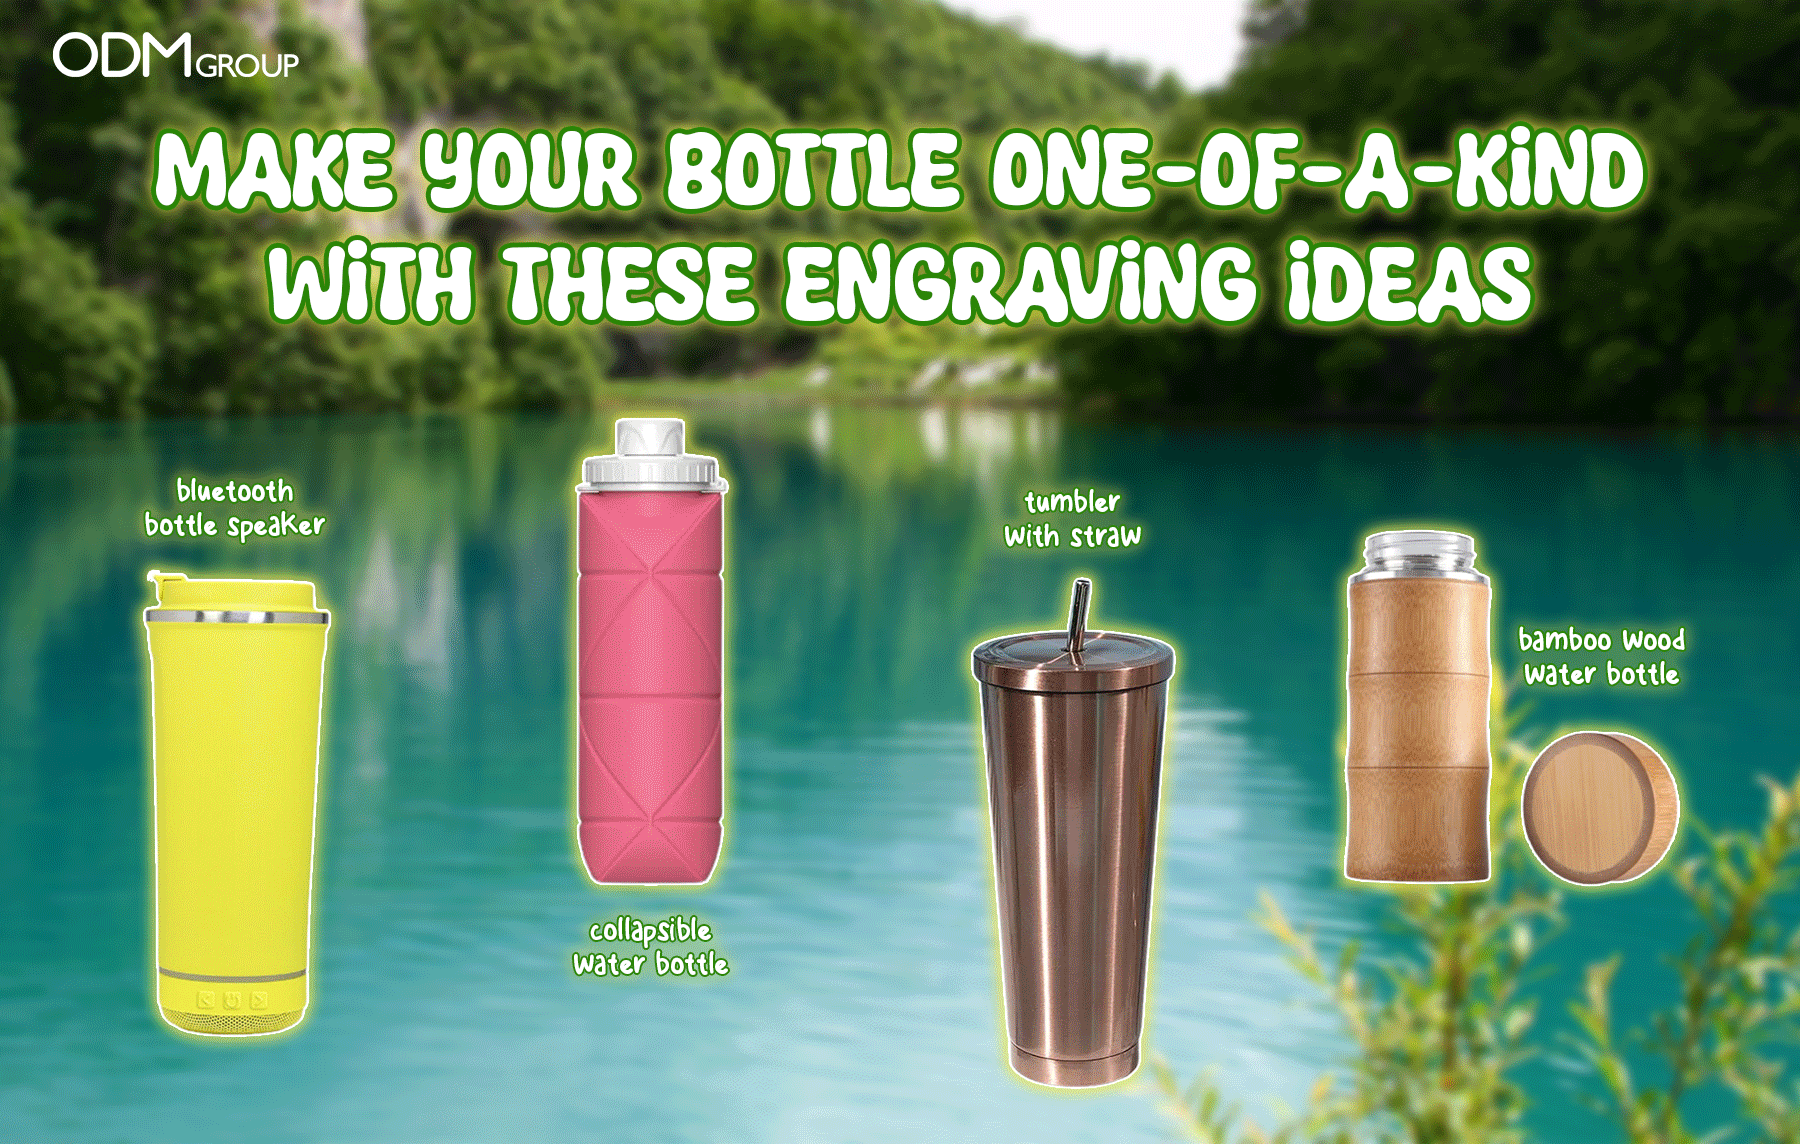 Various water bottles with engraving ideas, ideal for corporate holiday gift ideas.